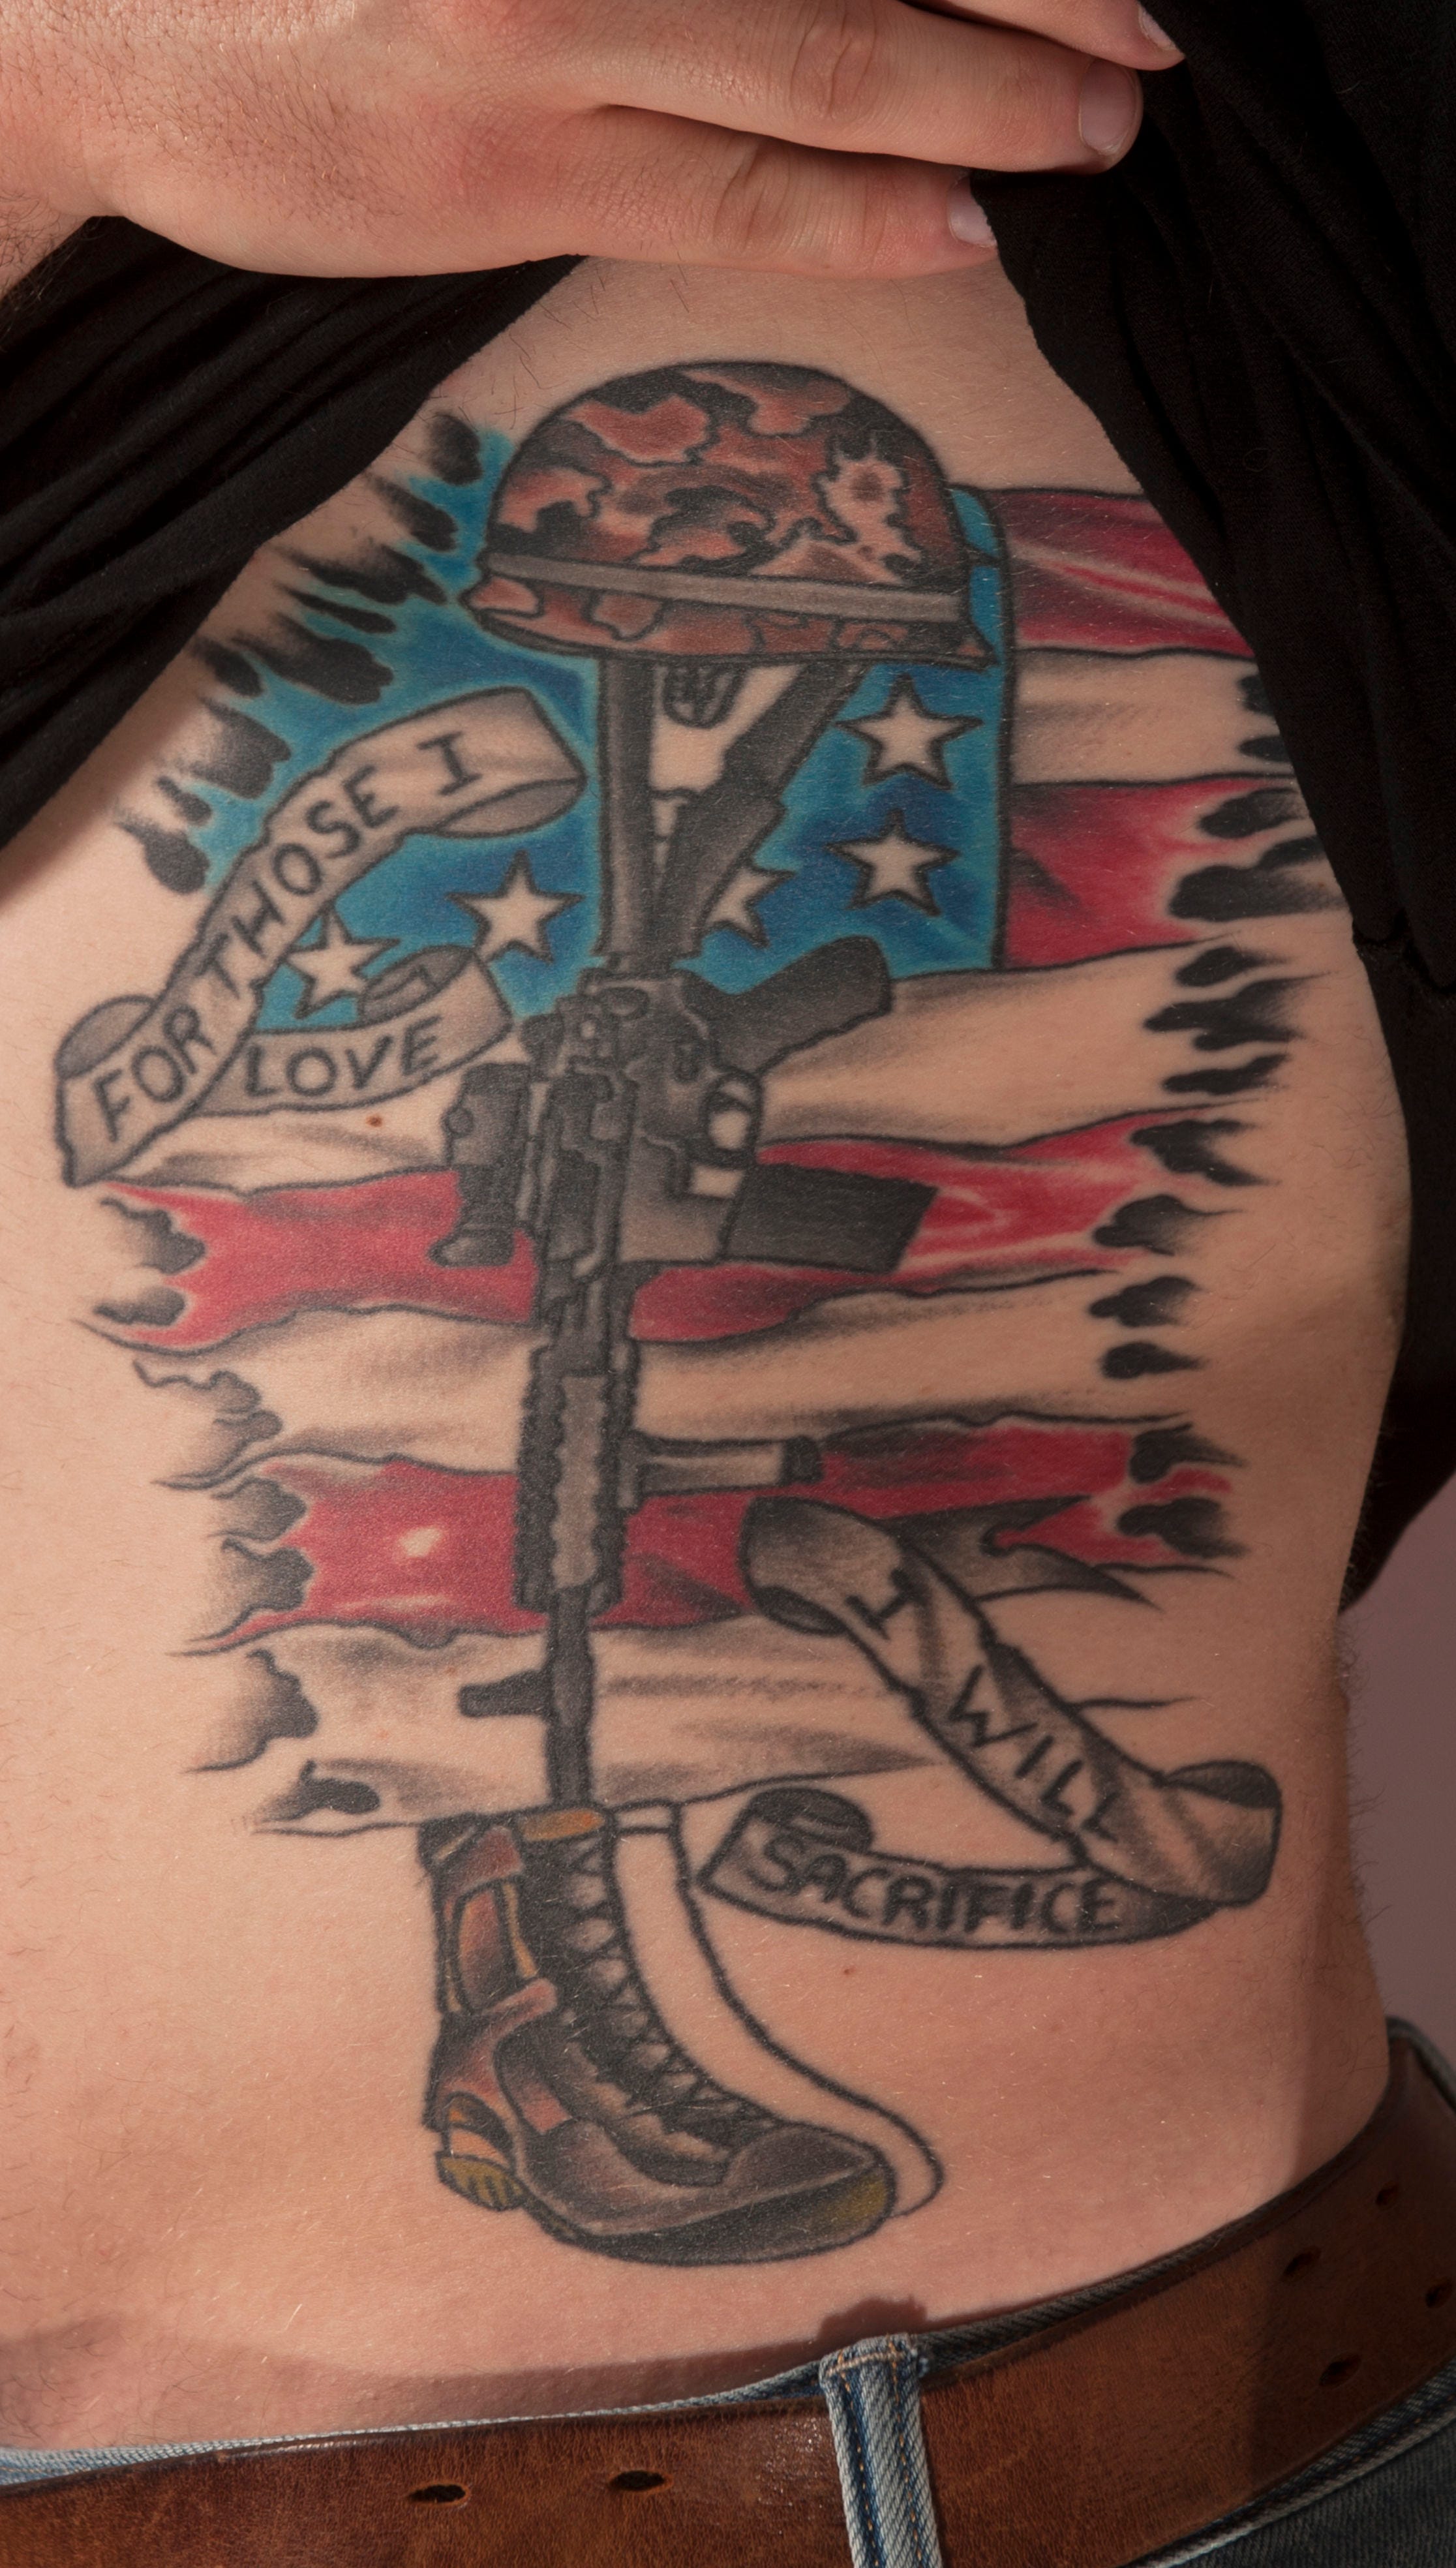 Veteran Ink  Submission from George F an Army Veteran  Facebook